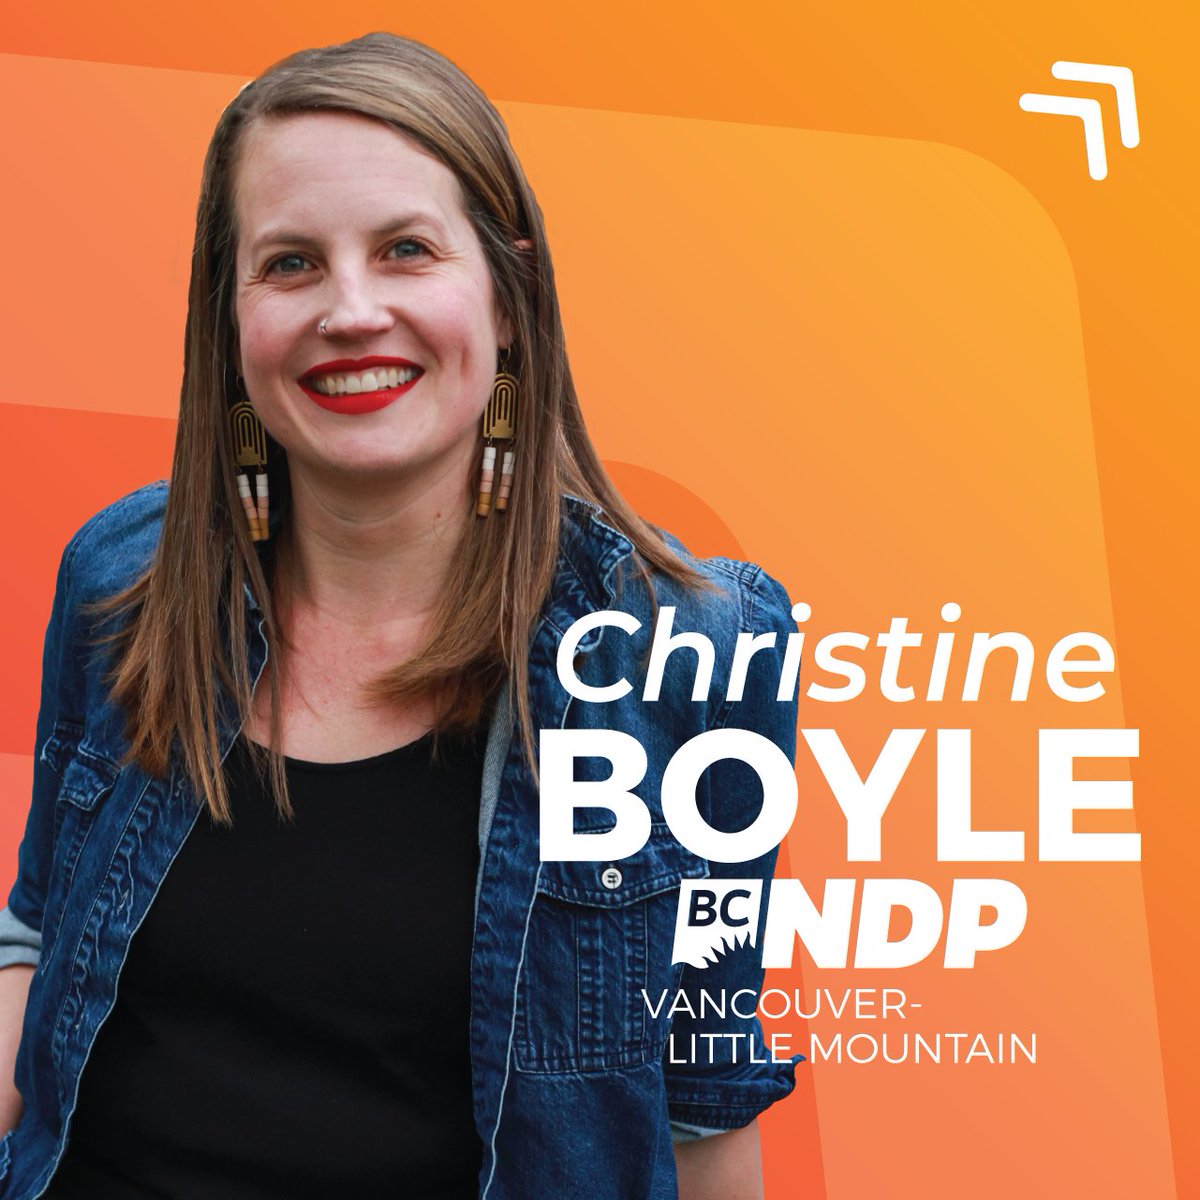 Christine Boyle is the BC NDP’s candidate in Vancouver-Little Mountain. A strong advocate for rental, co-op and non-market housing, she was elected to Vancouver City Council in 2018 and 2022. She has worked in environmental and climate advocacy. Welcome!